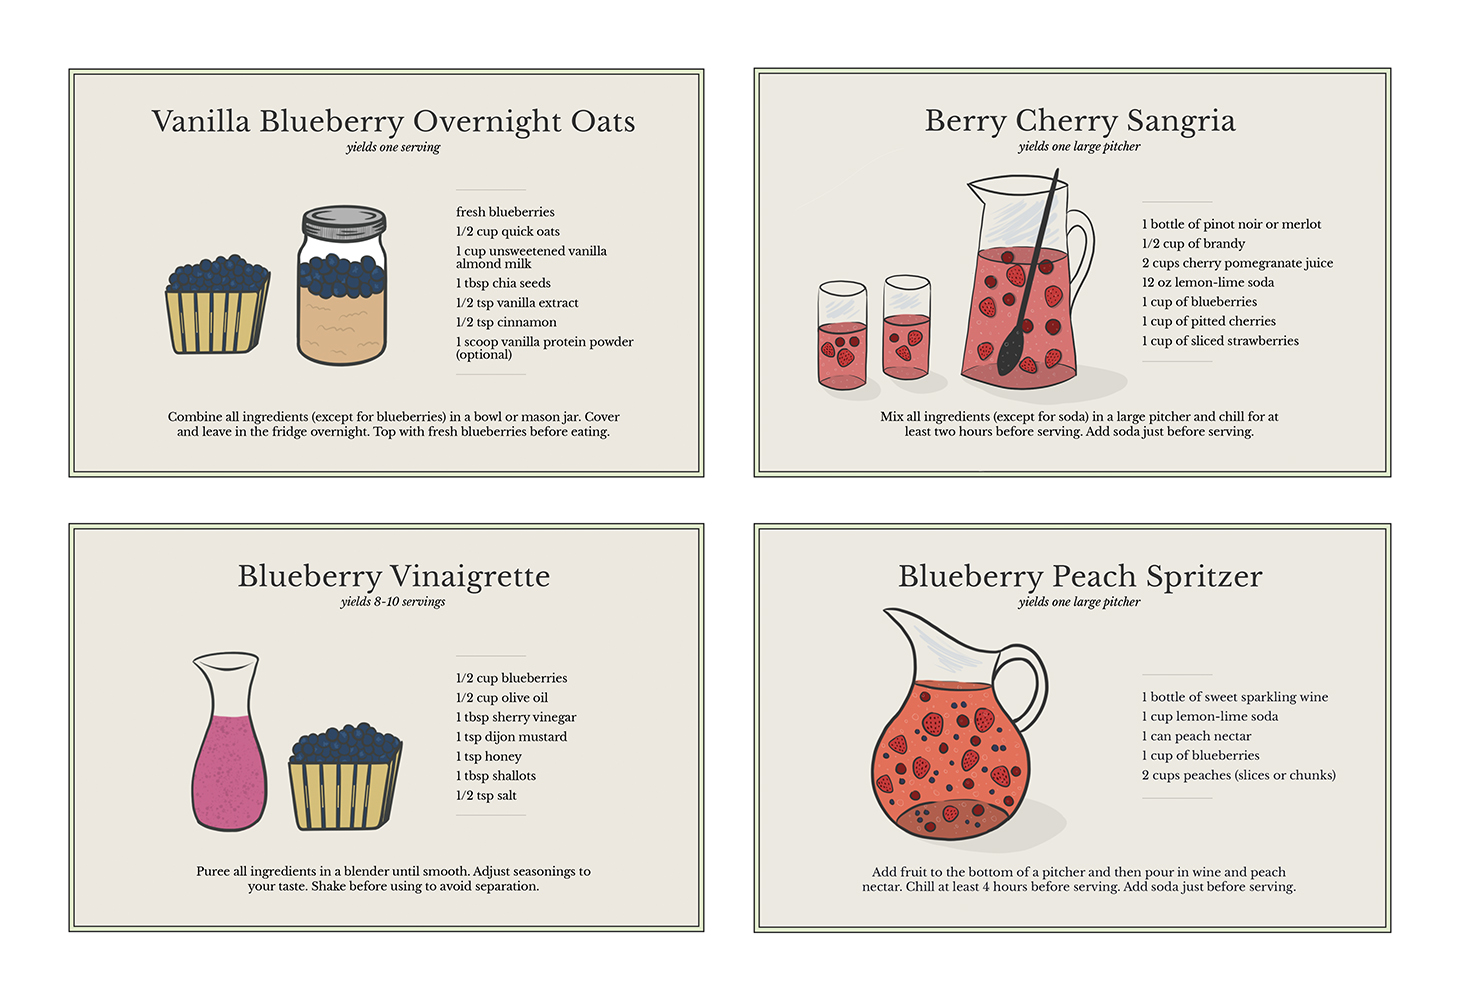 Recipe cards featuring ways to eat blueberries